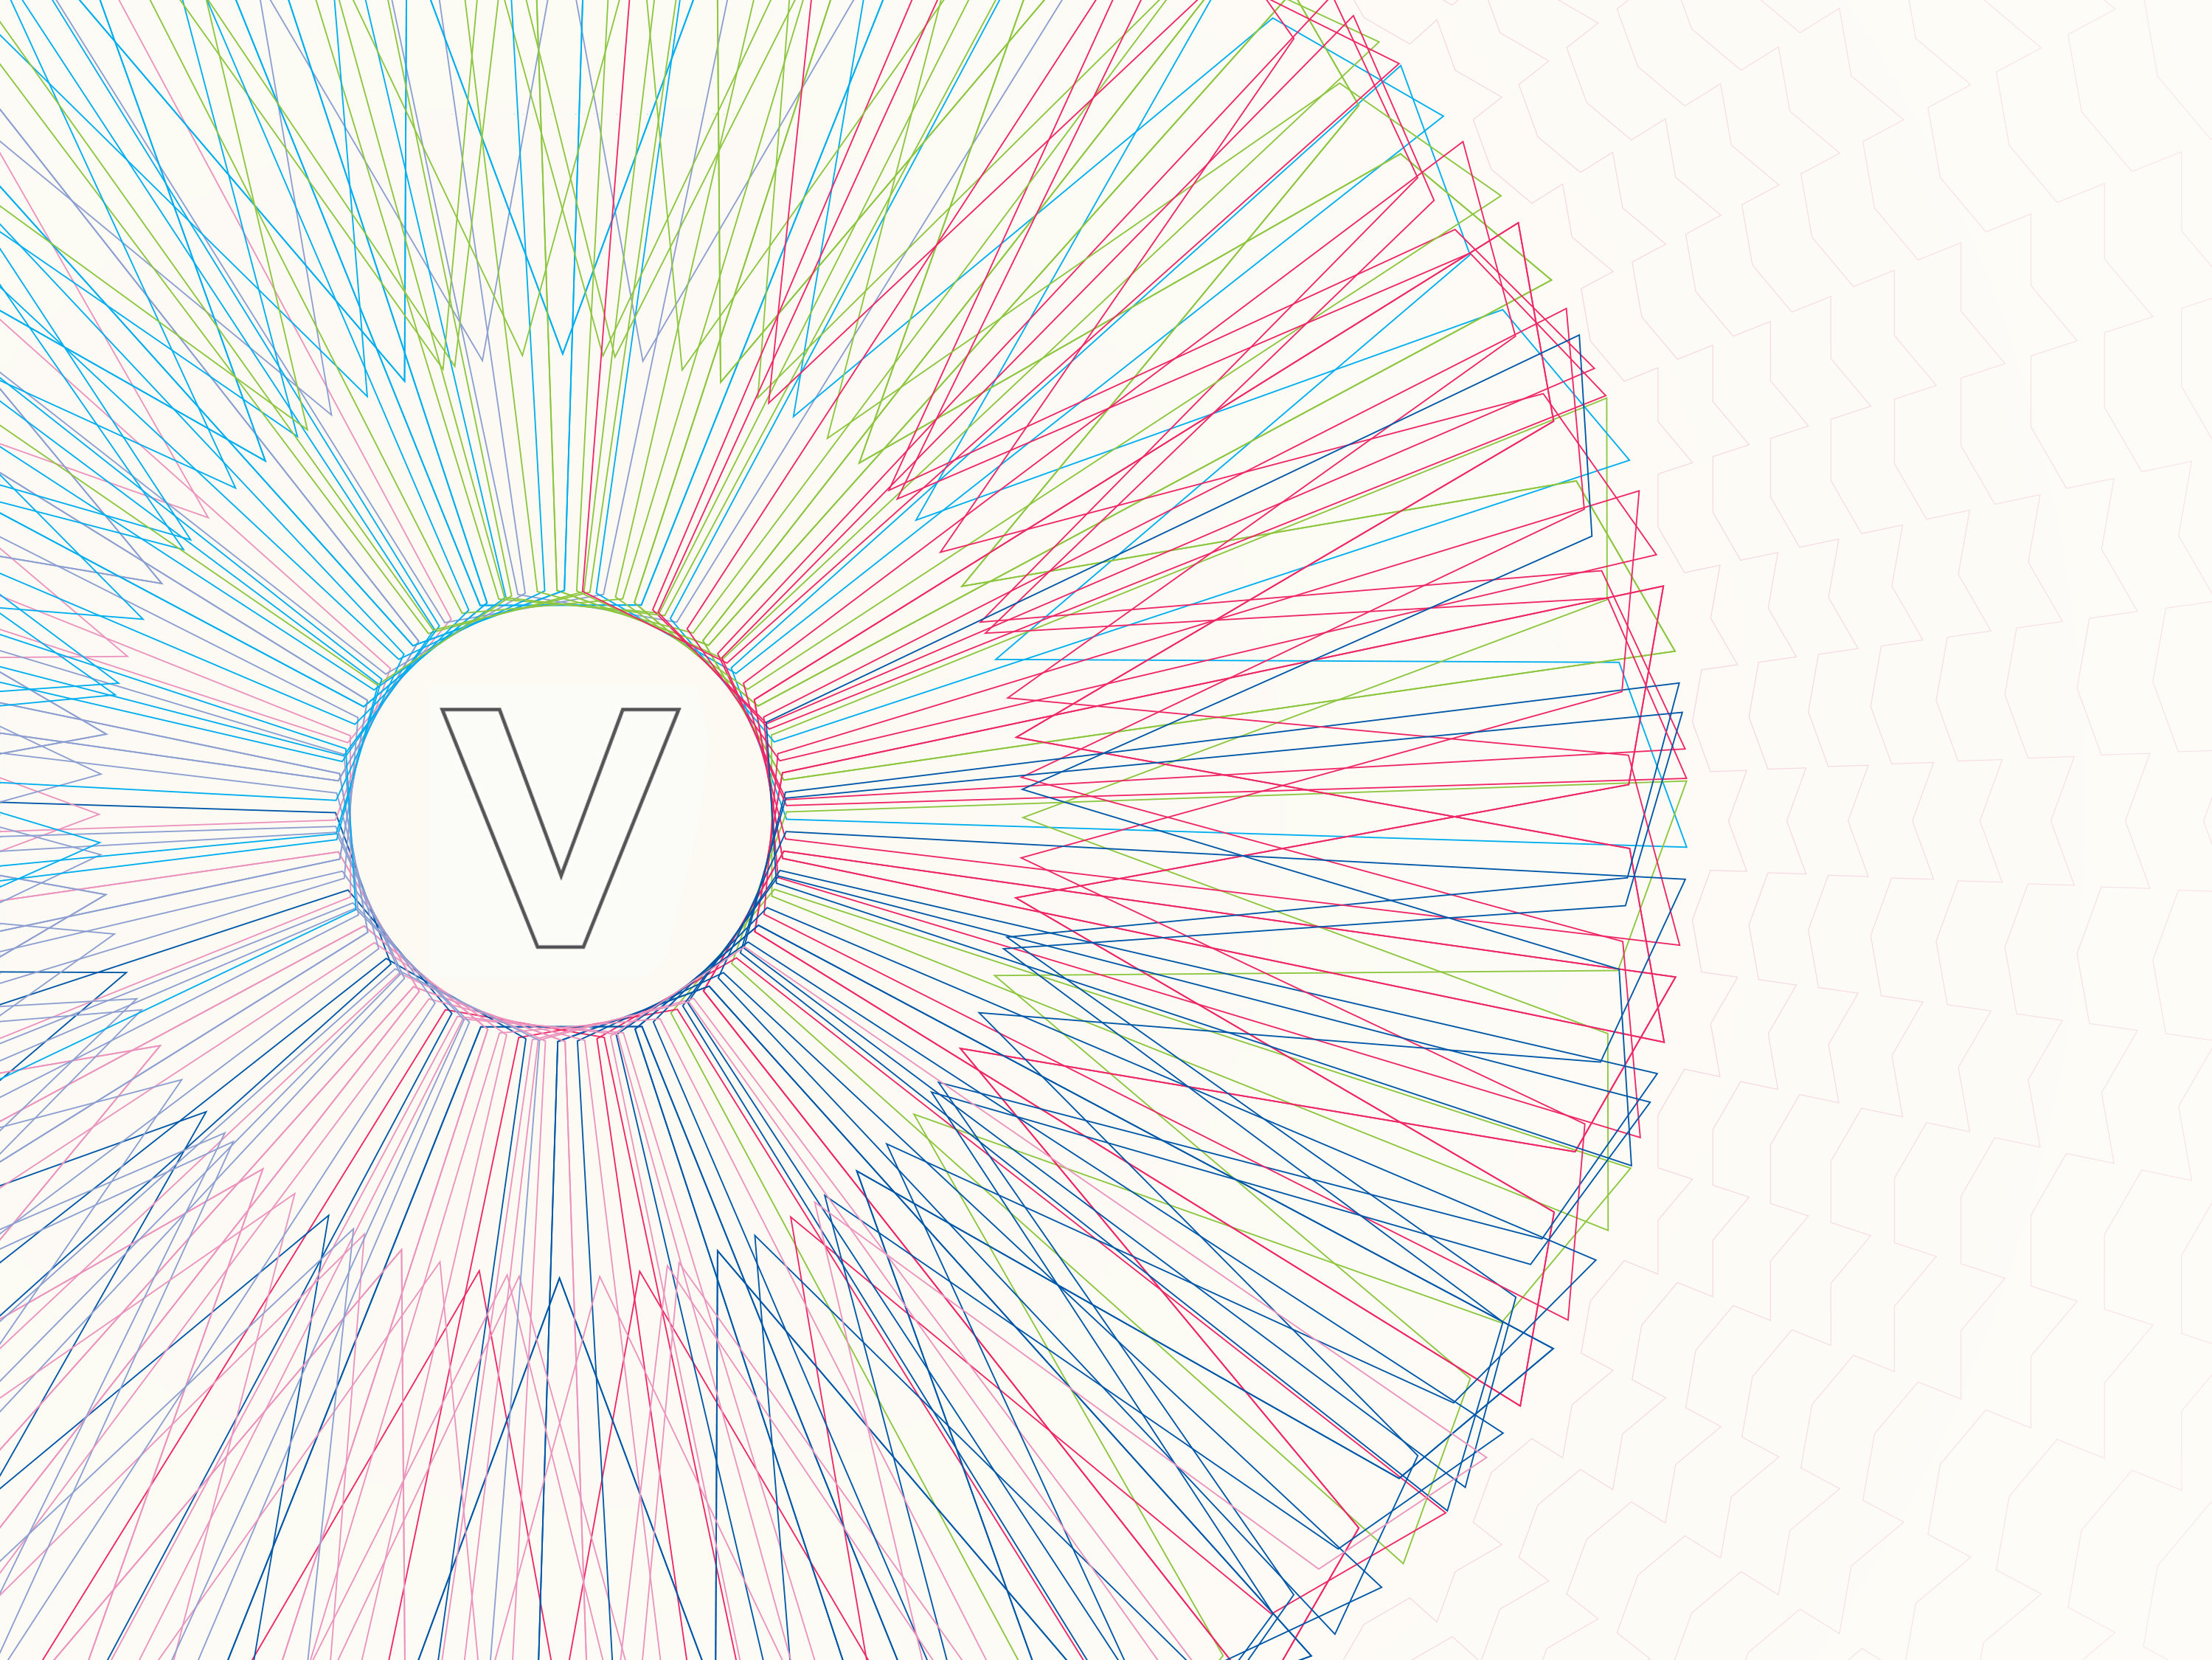 The letter V is centered in a circle, surrounded by outstretching lines in a rainbow of colors that are blended and interconnected to form a larger circle.